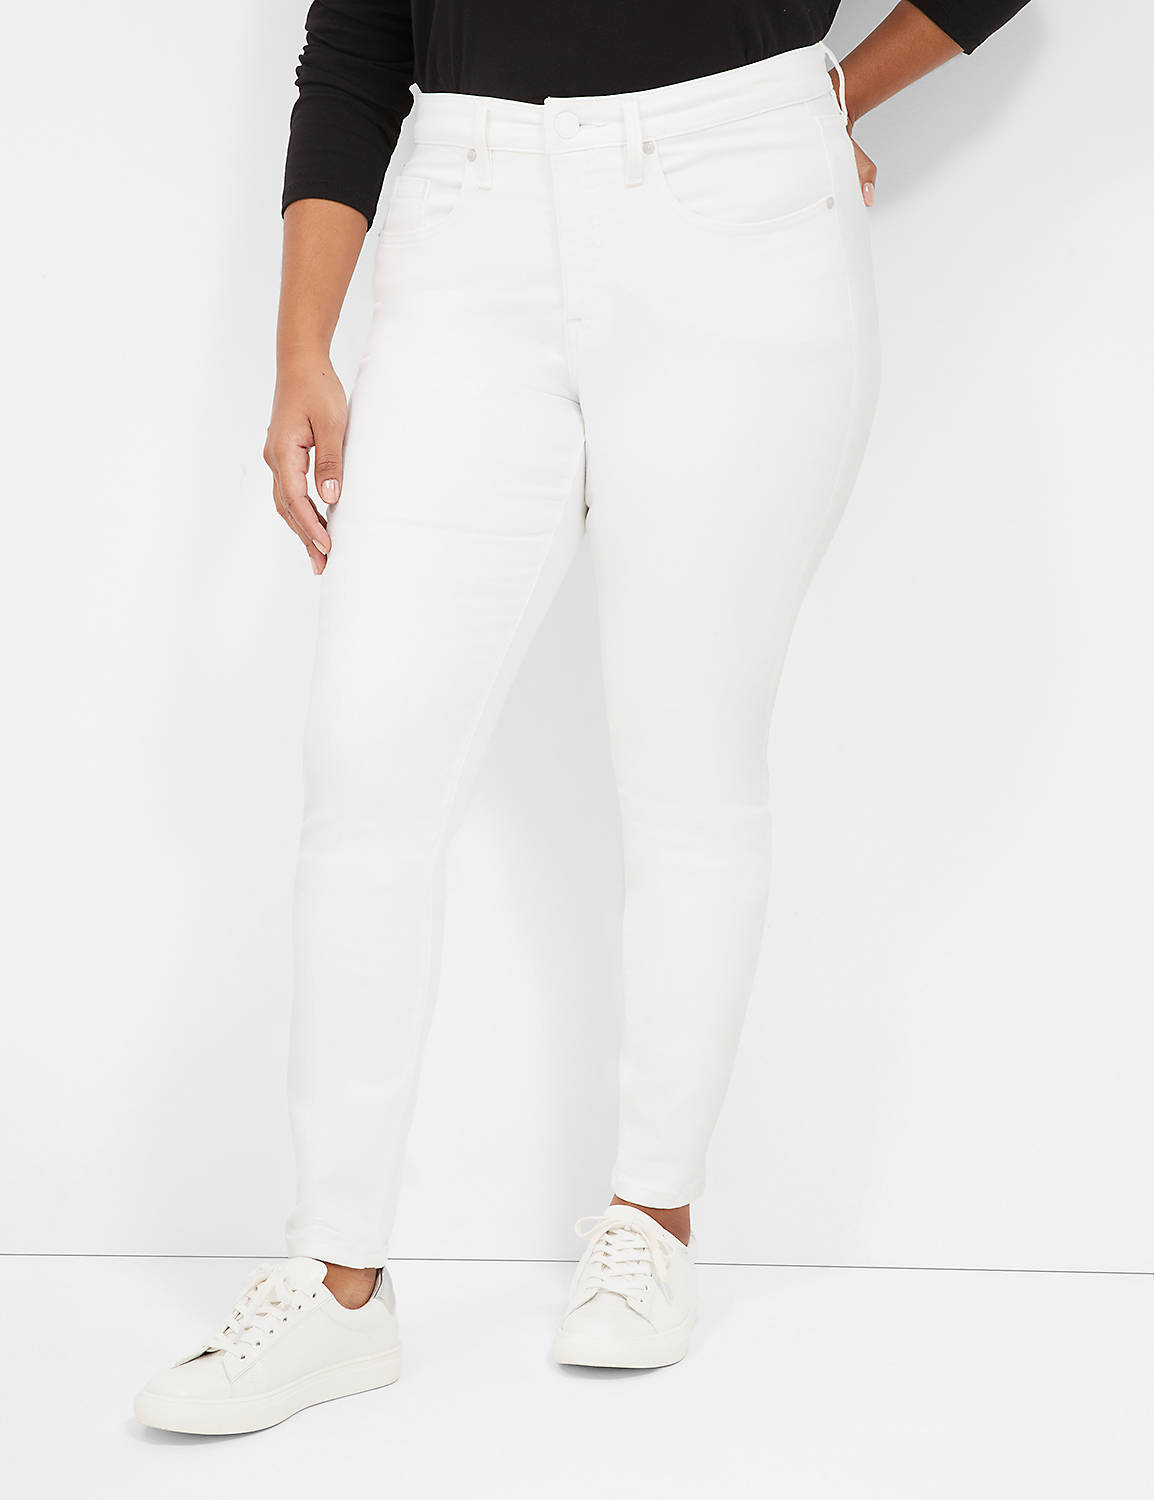 SIGNATURE MID RISE SKINNY - WHITE Y Product Image 1